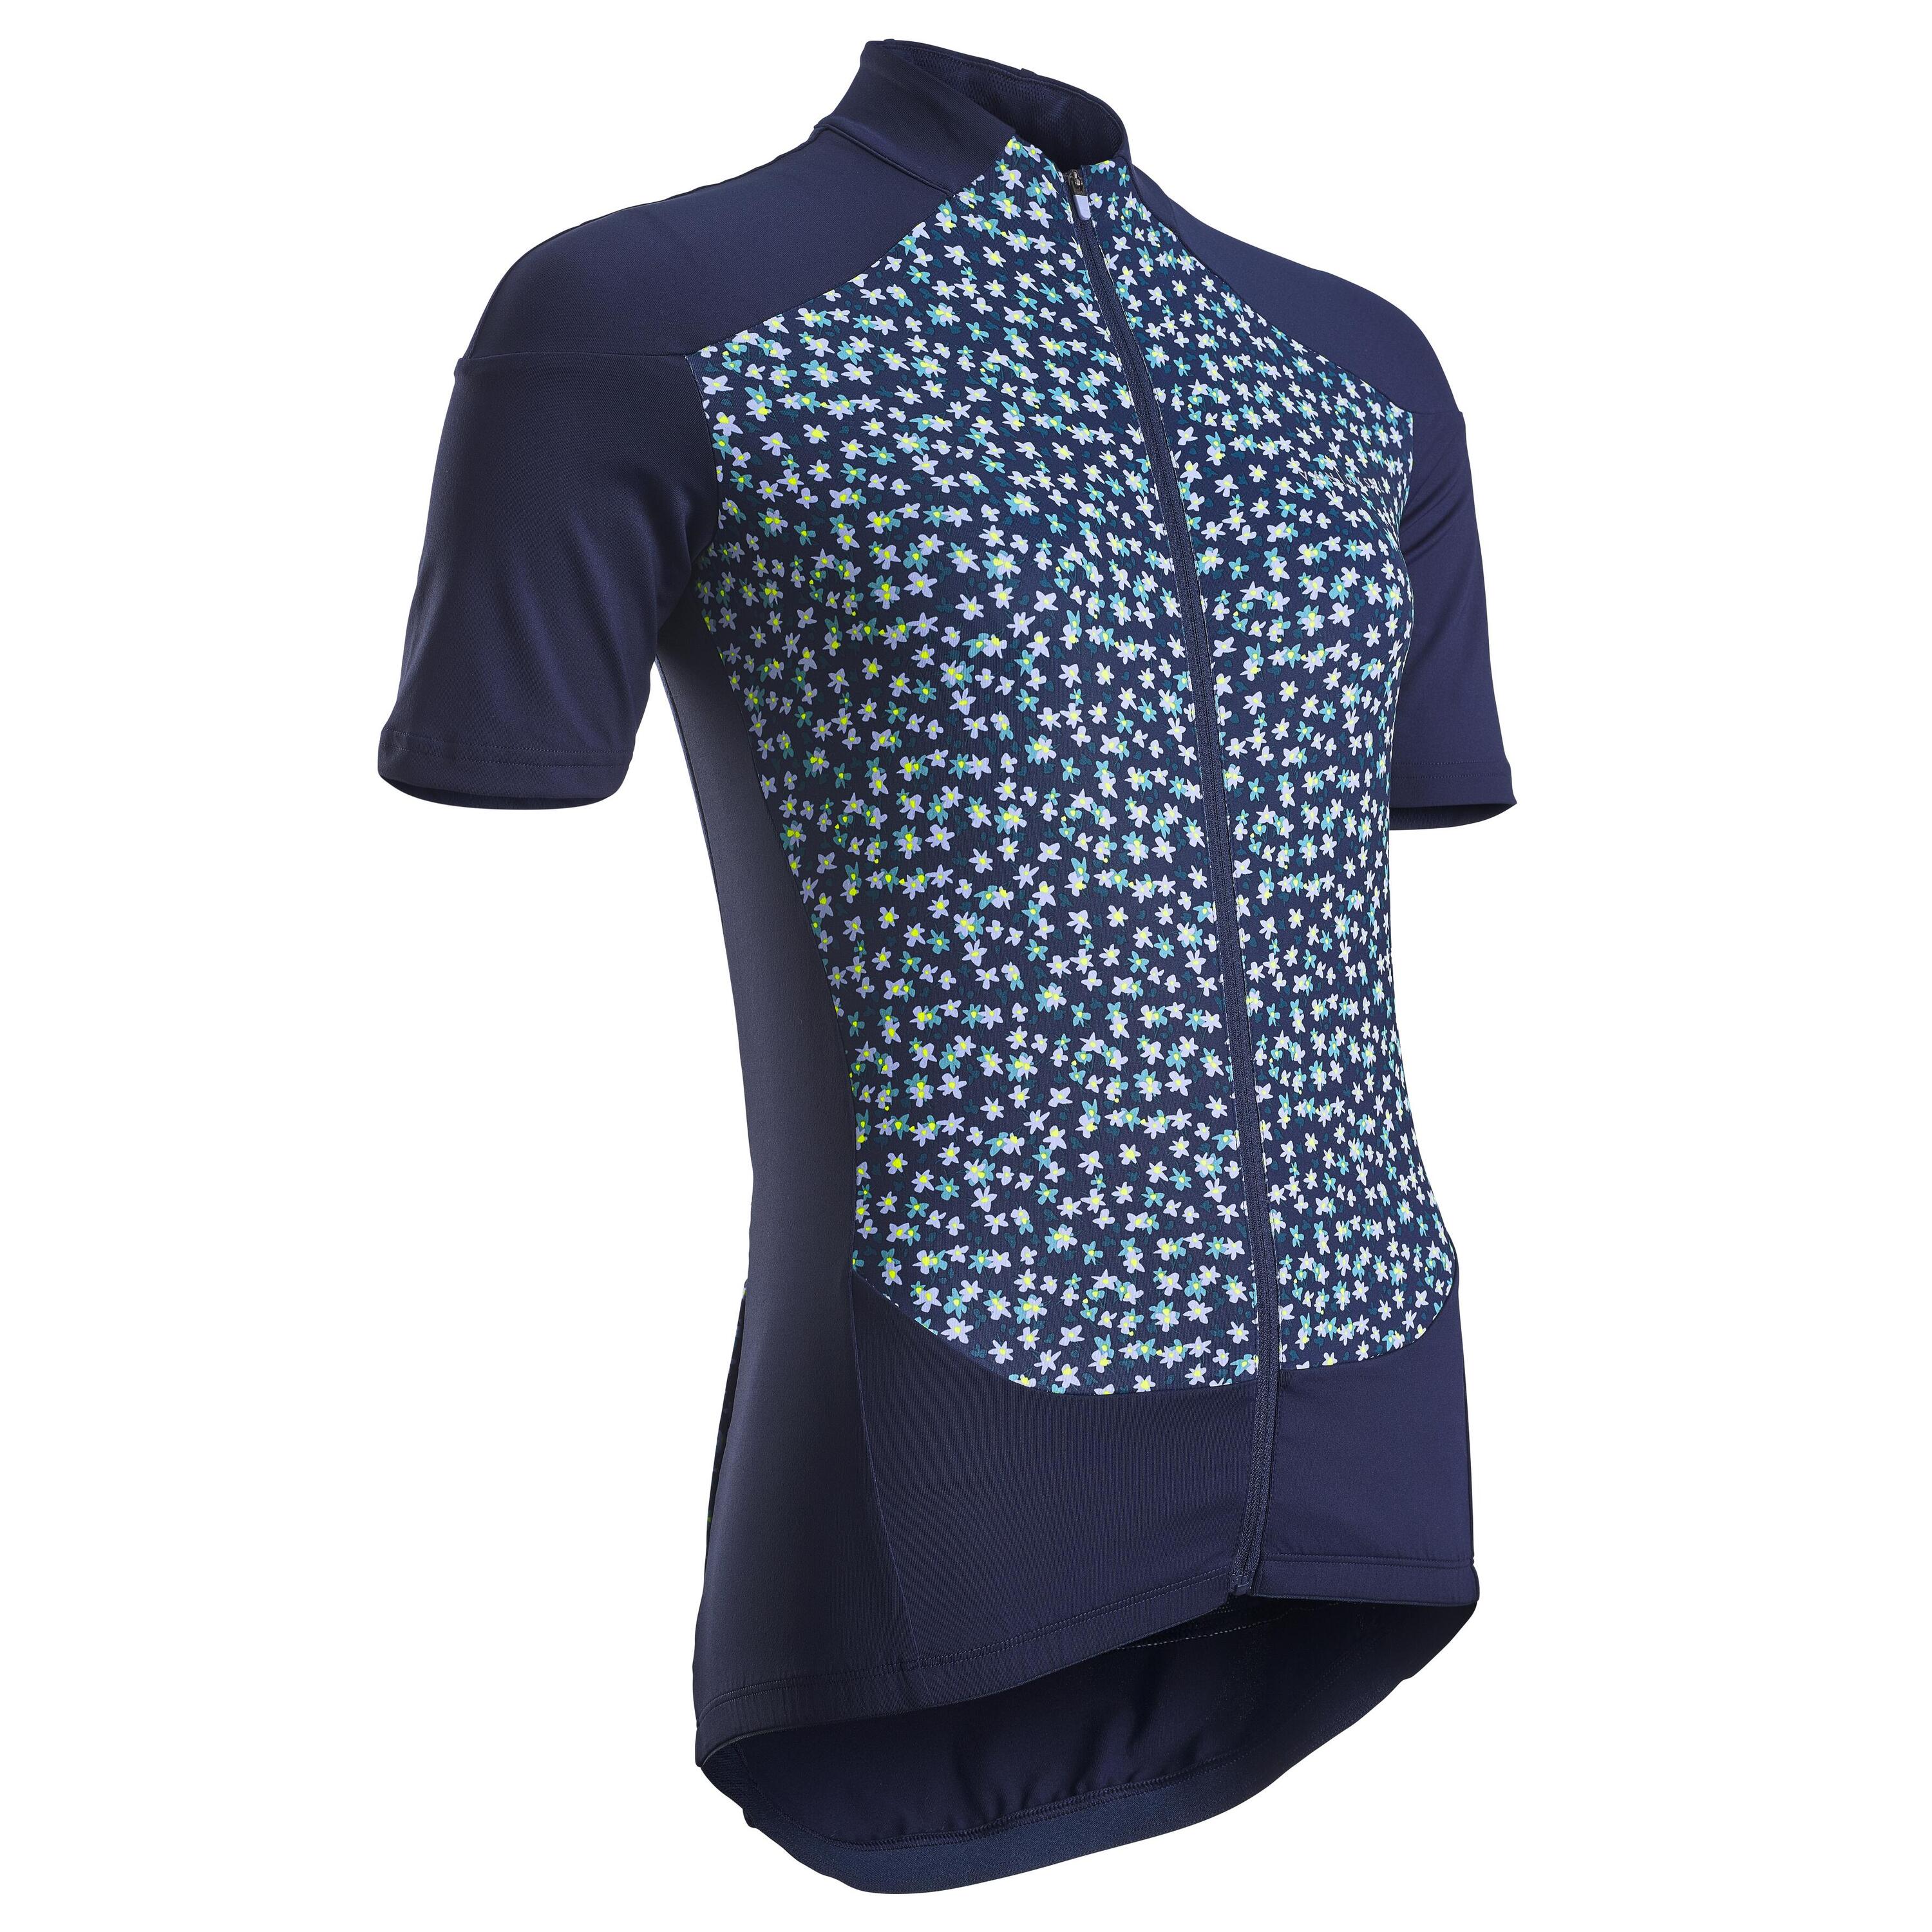 Women's Short-Sleeved Road Cycling Jersey RC500 - Floral/Navy 1/7